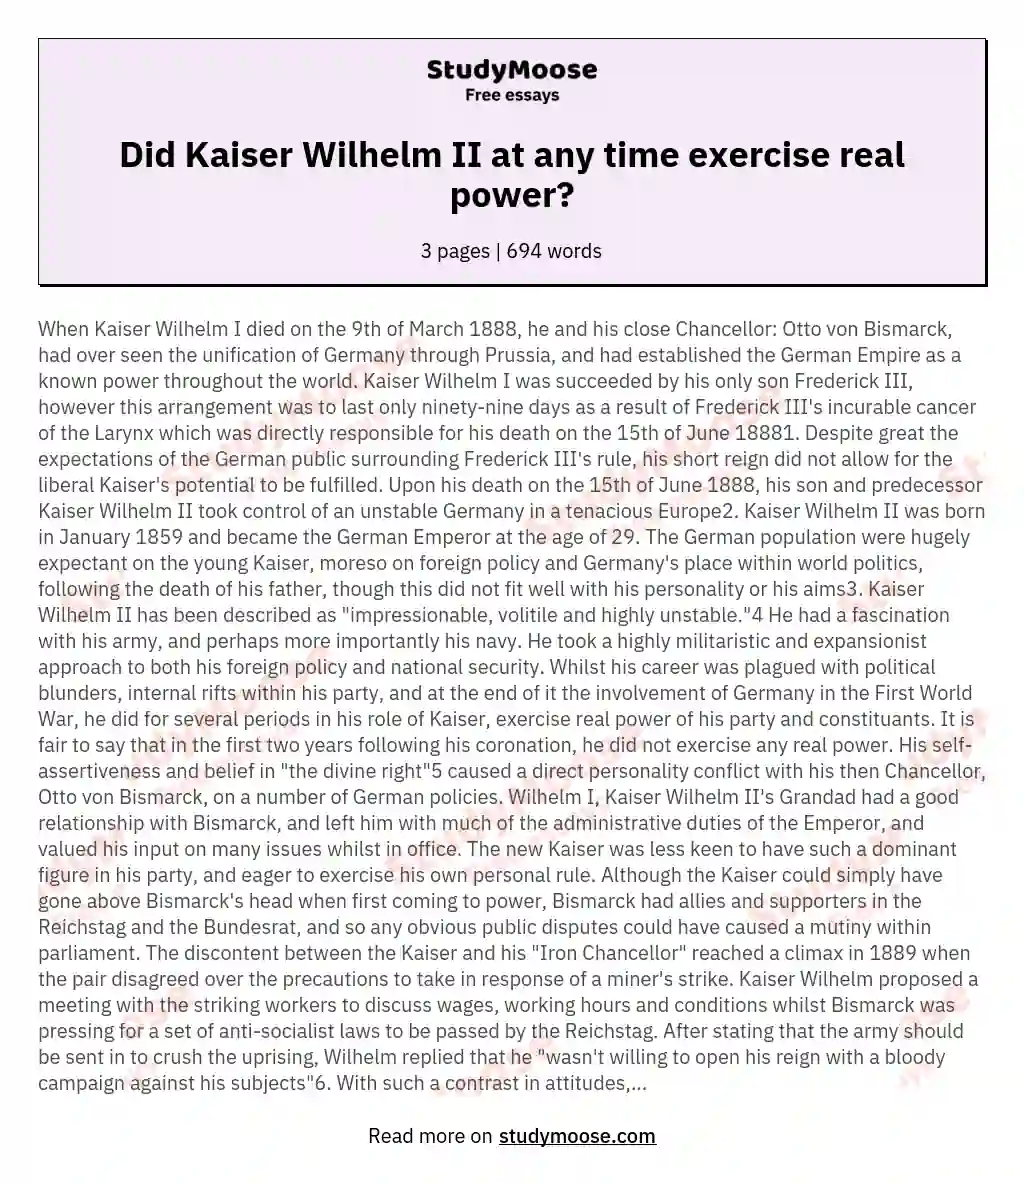 Did Kaiser Wilhelm II at any time exercise real power?